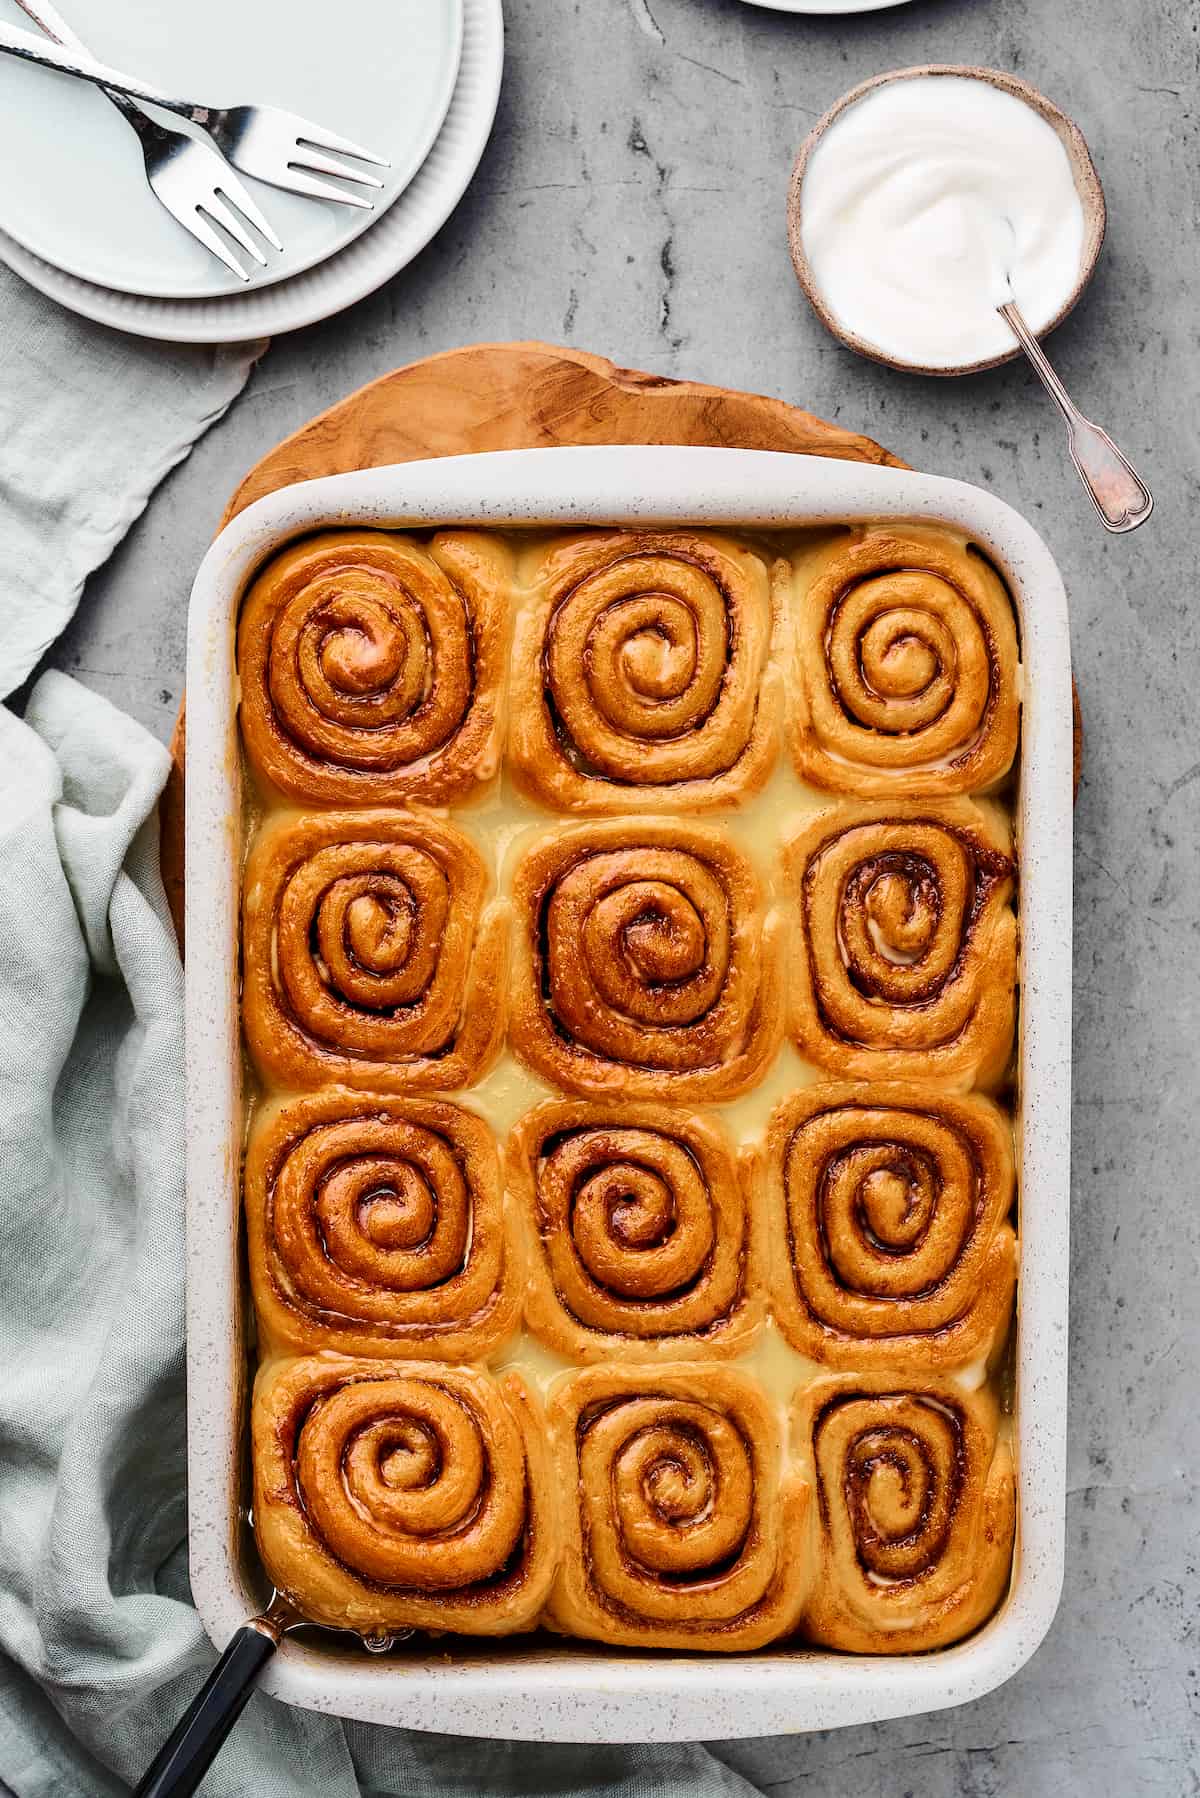 Baked cinnamon rolls in a baking pan, with a cloth dishtowel nearby.